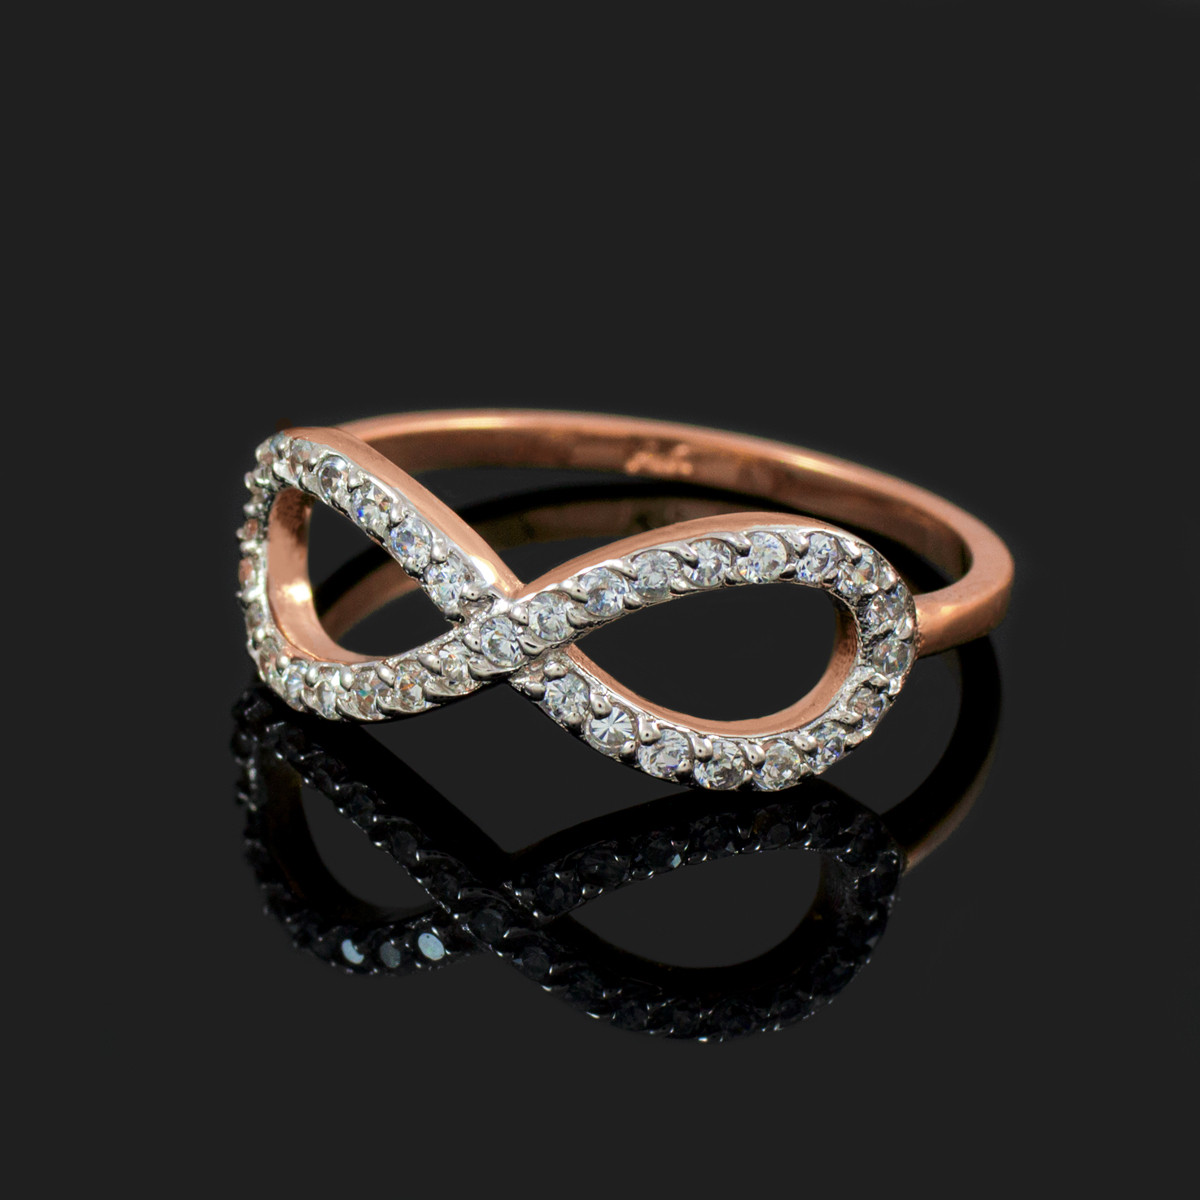 14kt Yellow Gold Infinity Symbol Ring with Diamond Accents | Ross-Simons